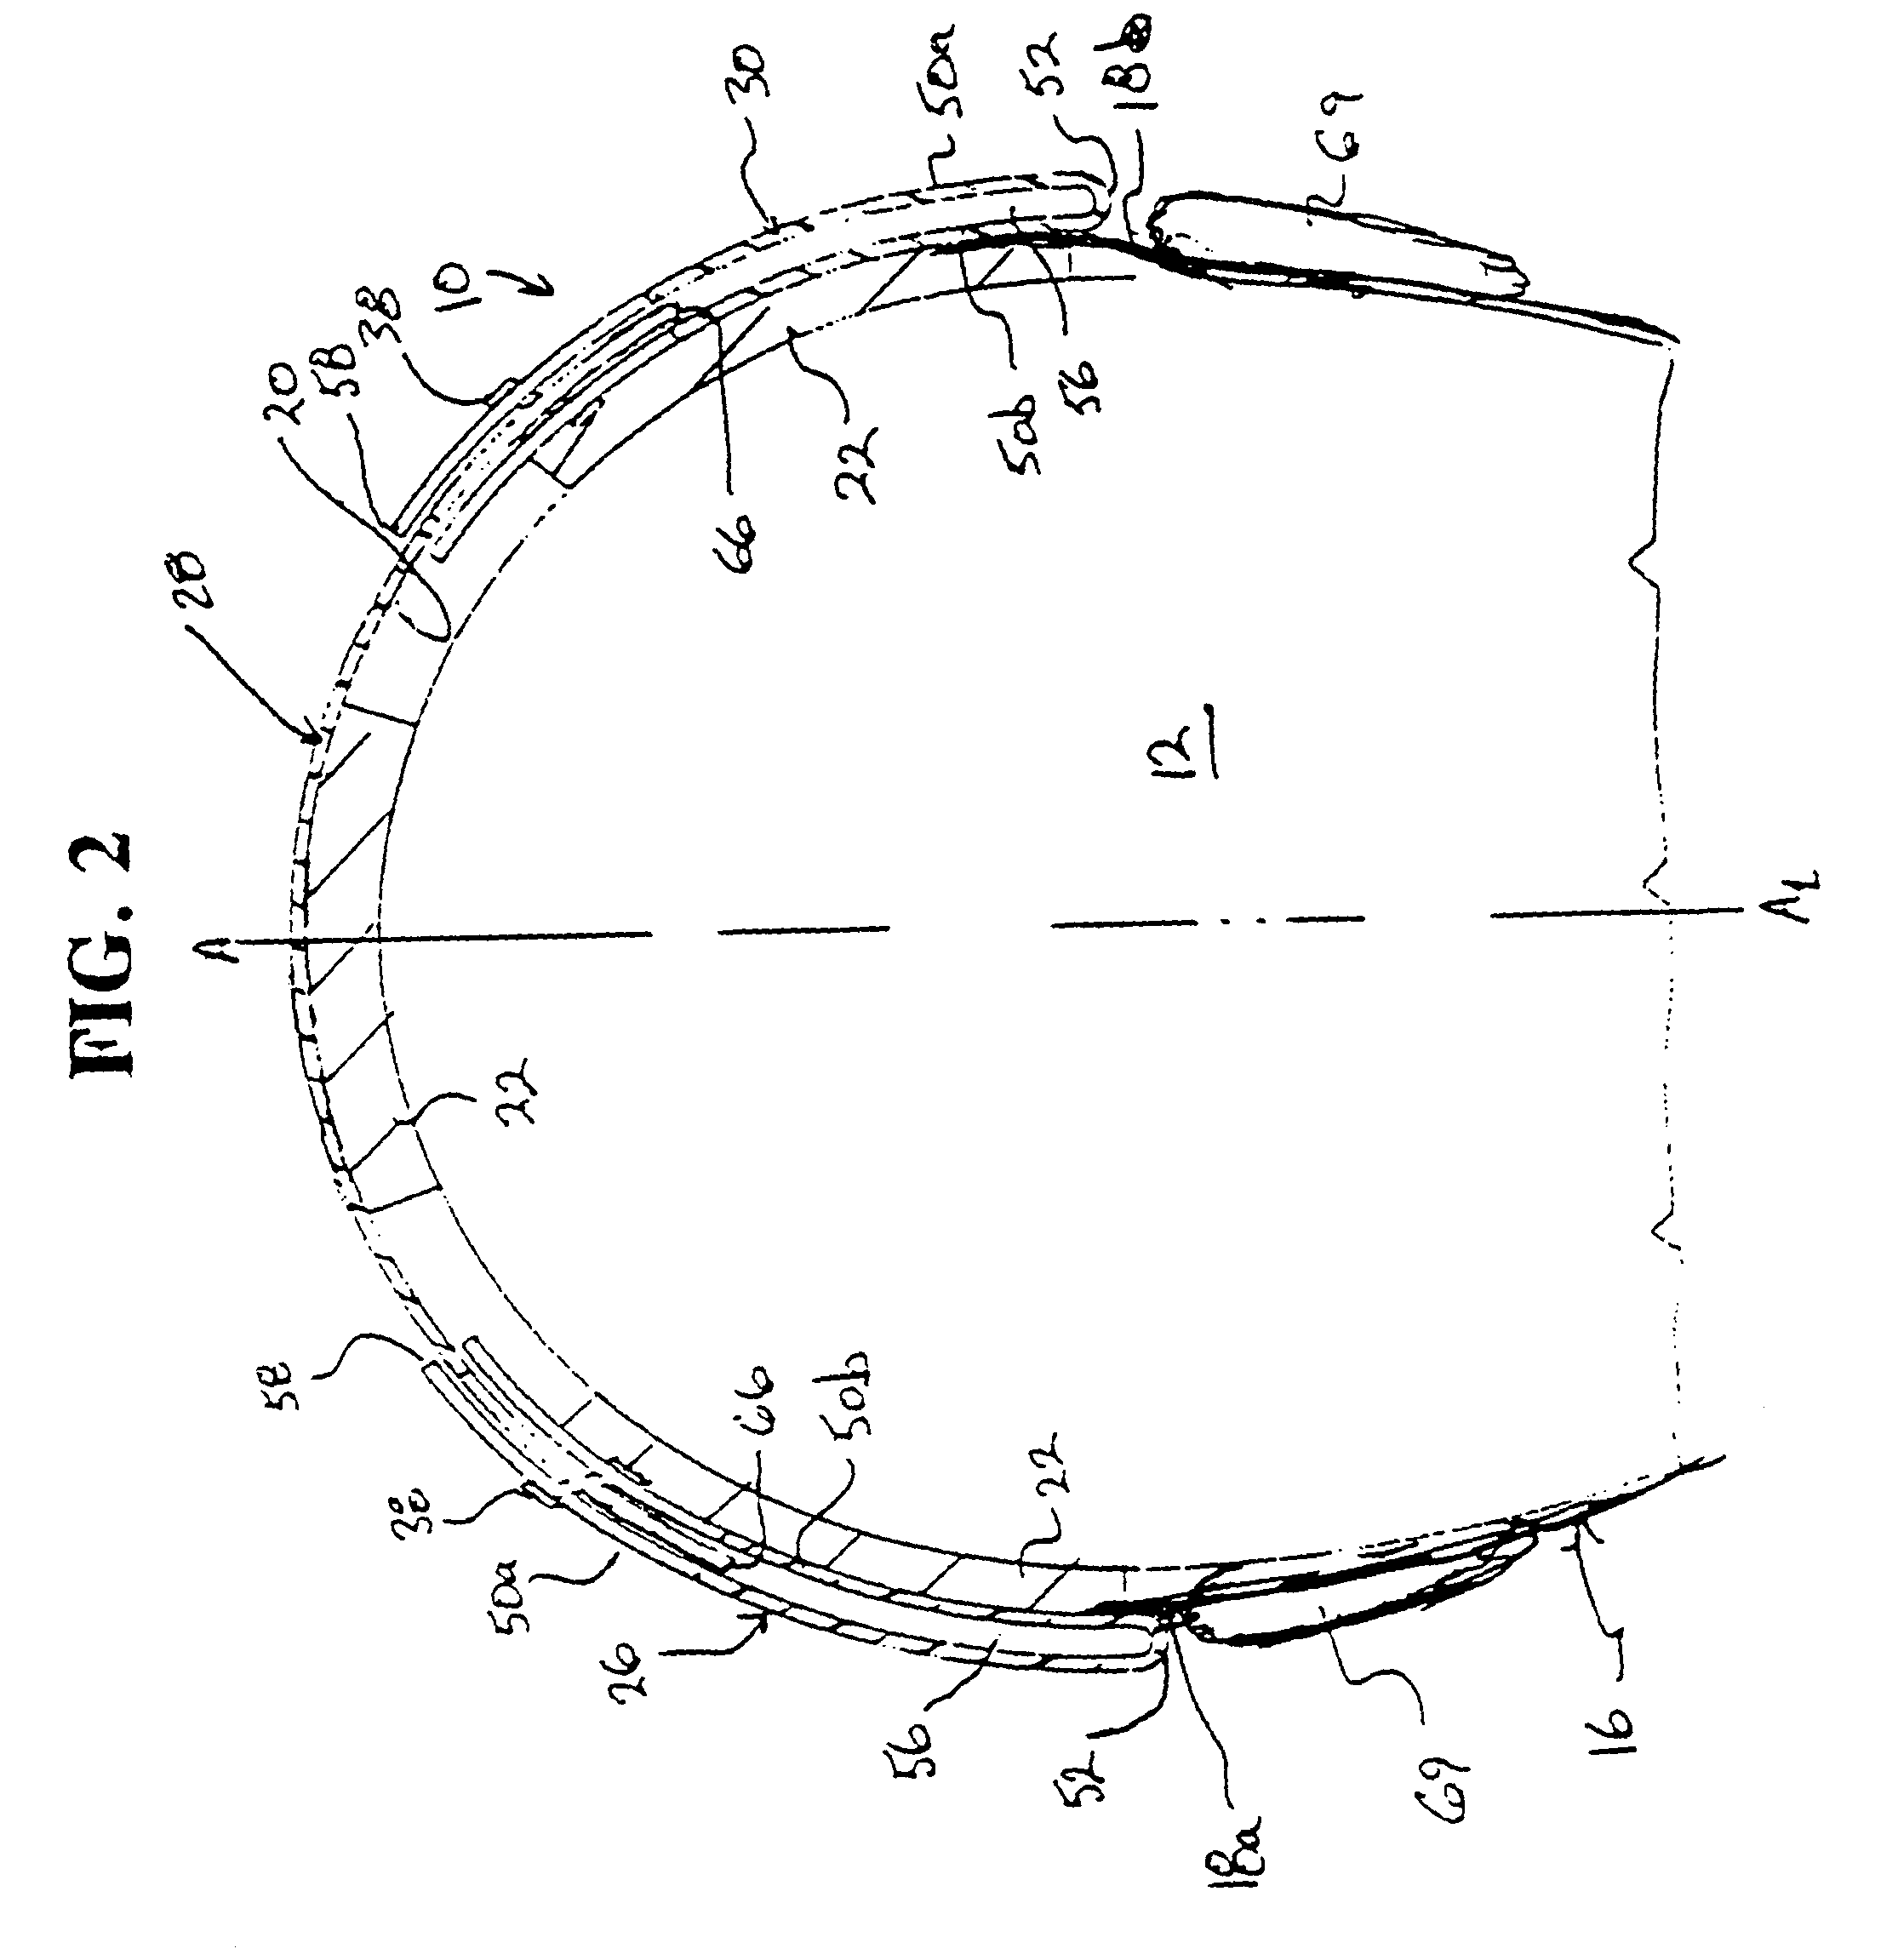 Protective head covering having impact absorbing crumple or shear zone